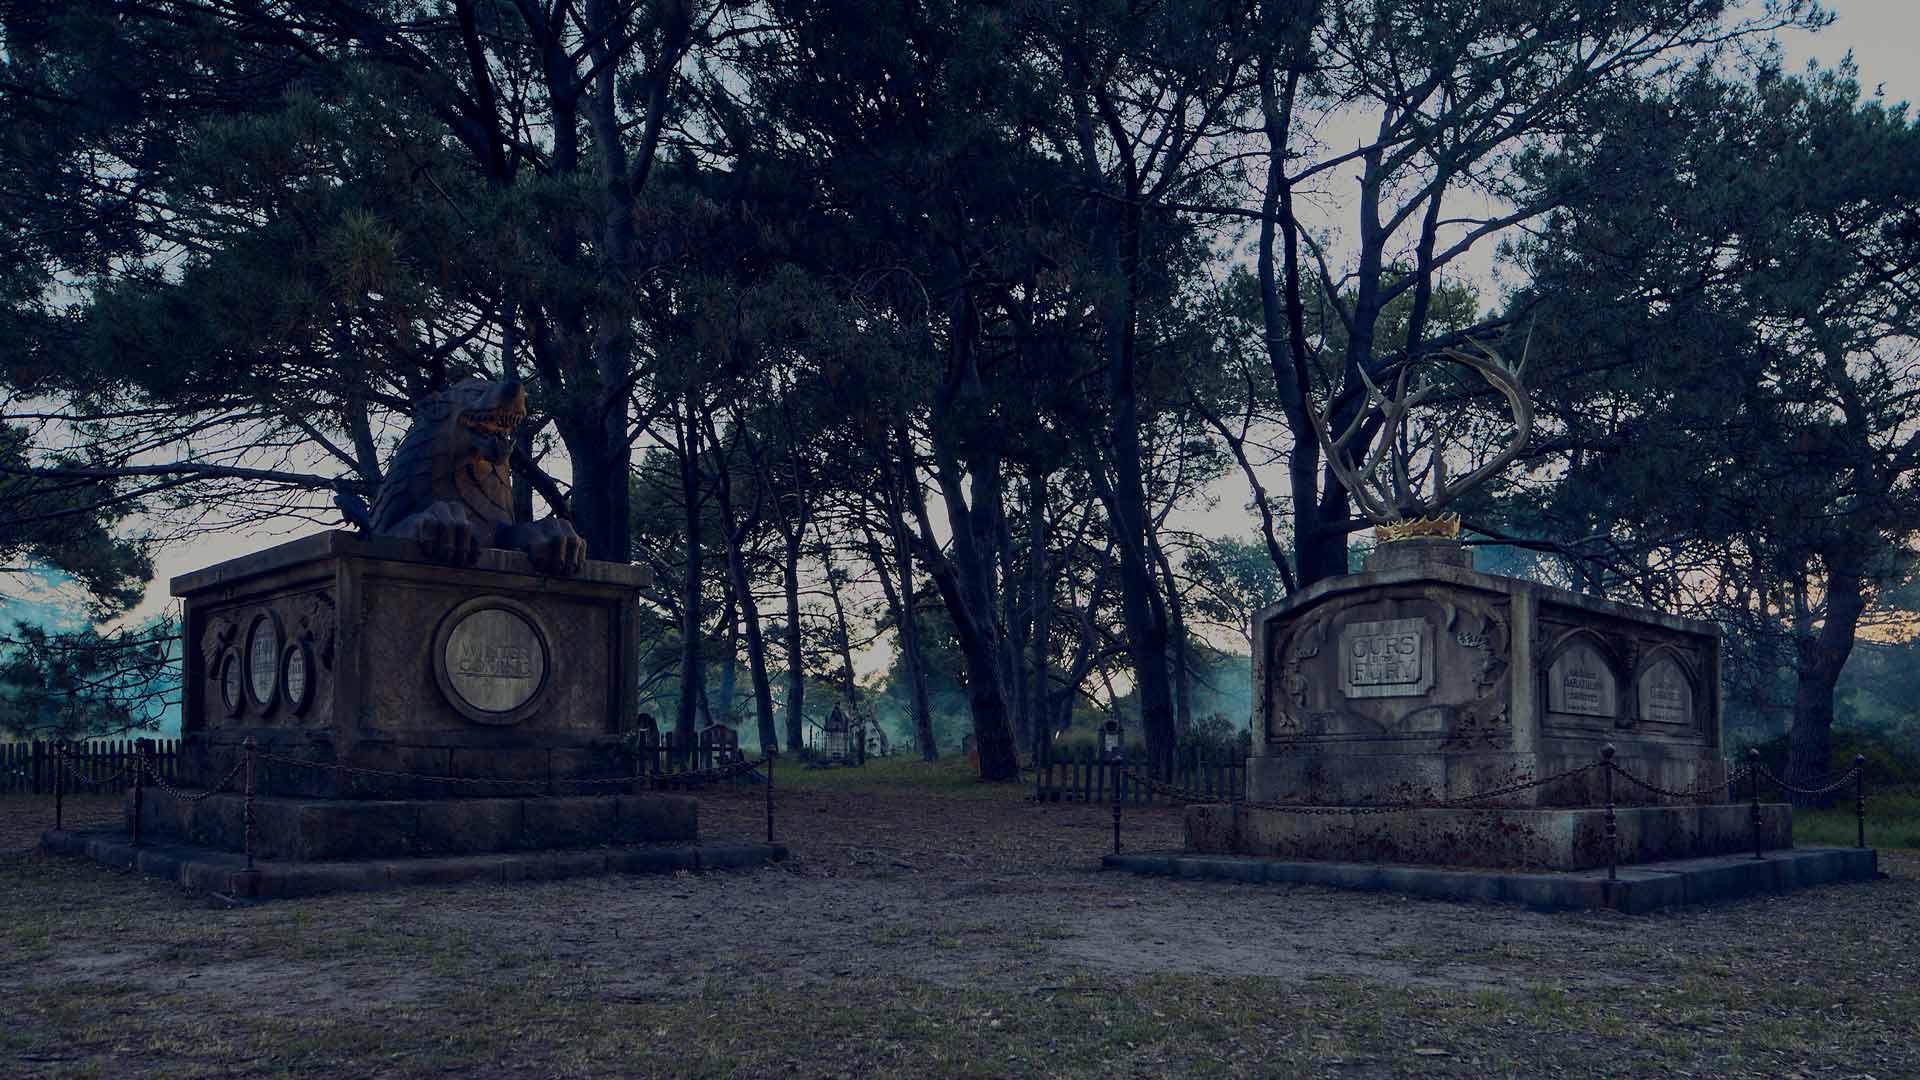 A Look Inside Sydney's Immersive and Ominous 'Game of Thrones' Graveyard